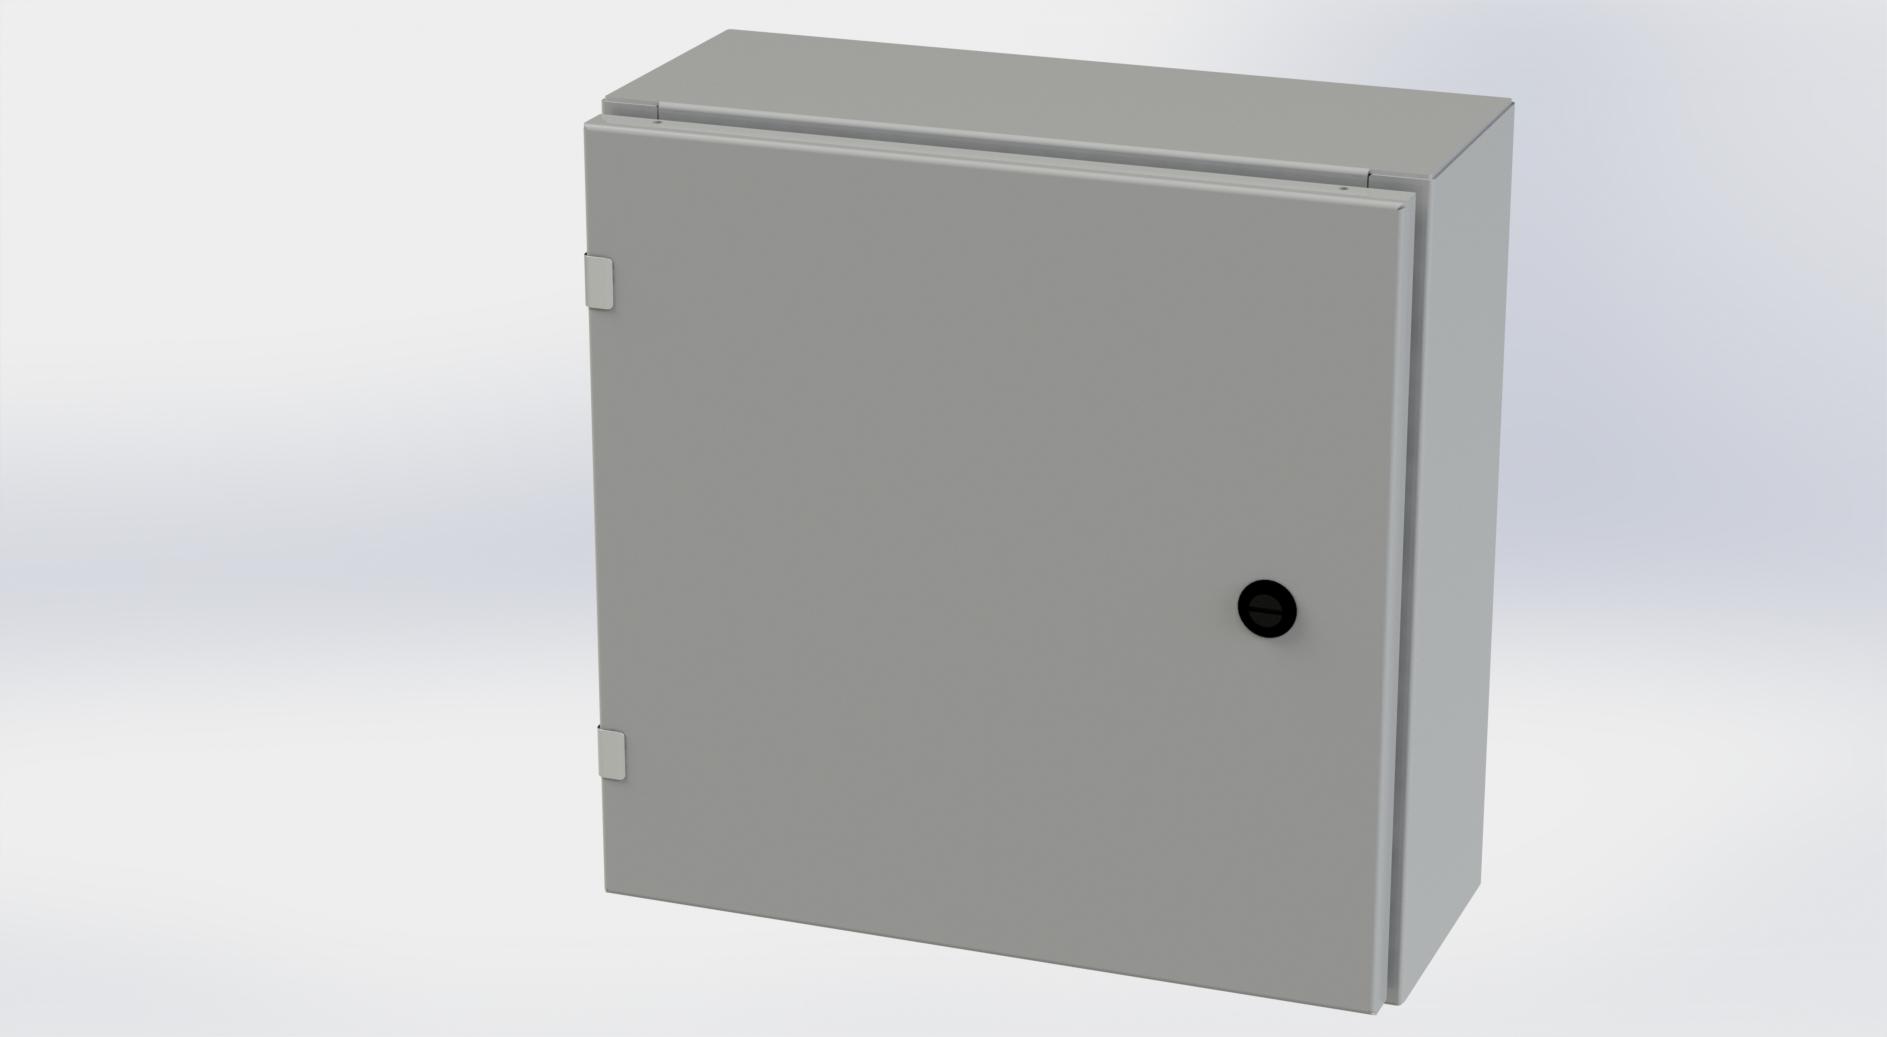 Saginaw Control SCE-16EL1606LP EL Enclosure, Height:16.00", Width:16.00", Depth:6.00", ANSI-61 gray powder coating inside and out. Optional sub-panels are powder coated white.